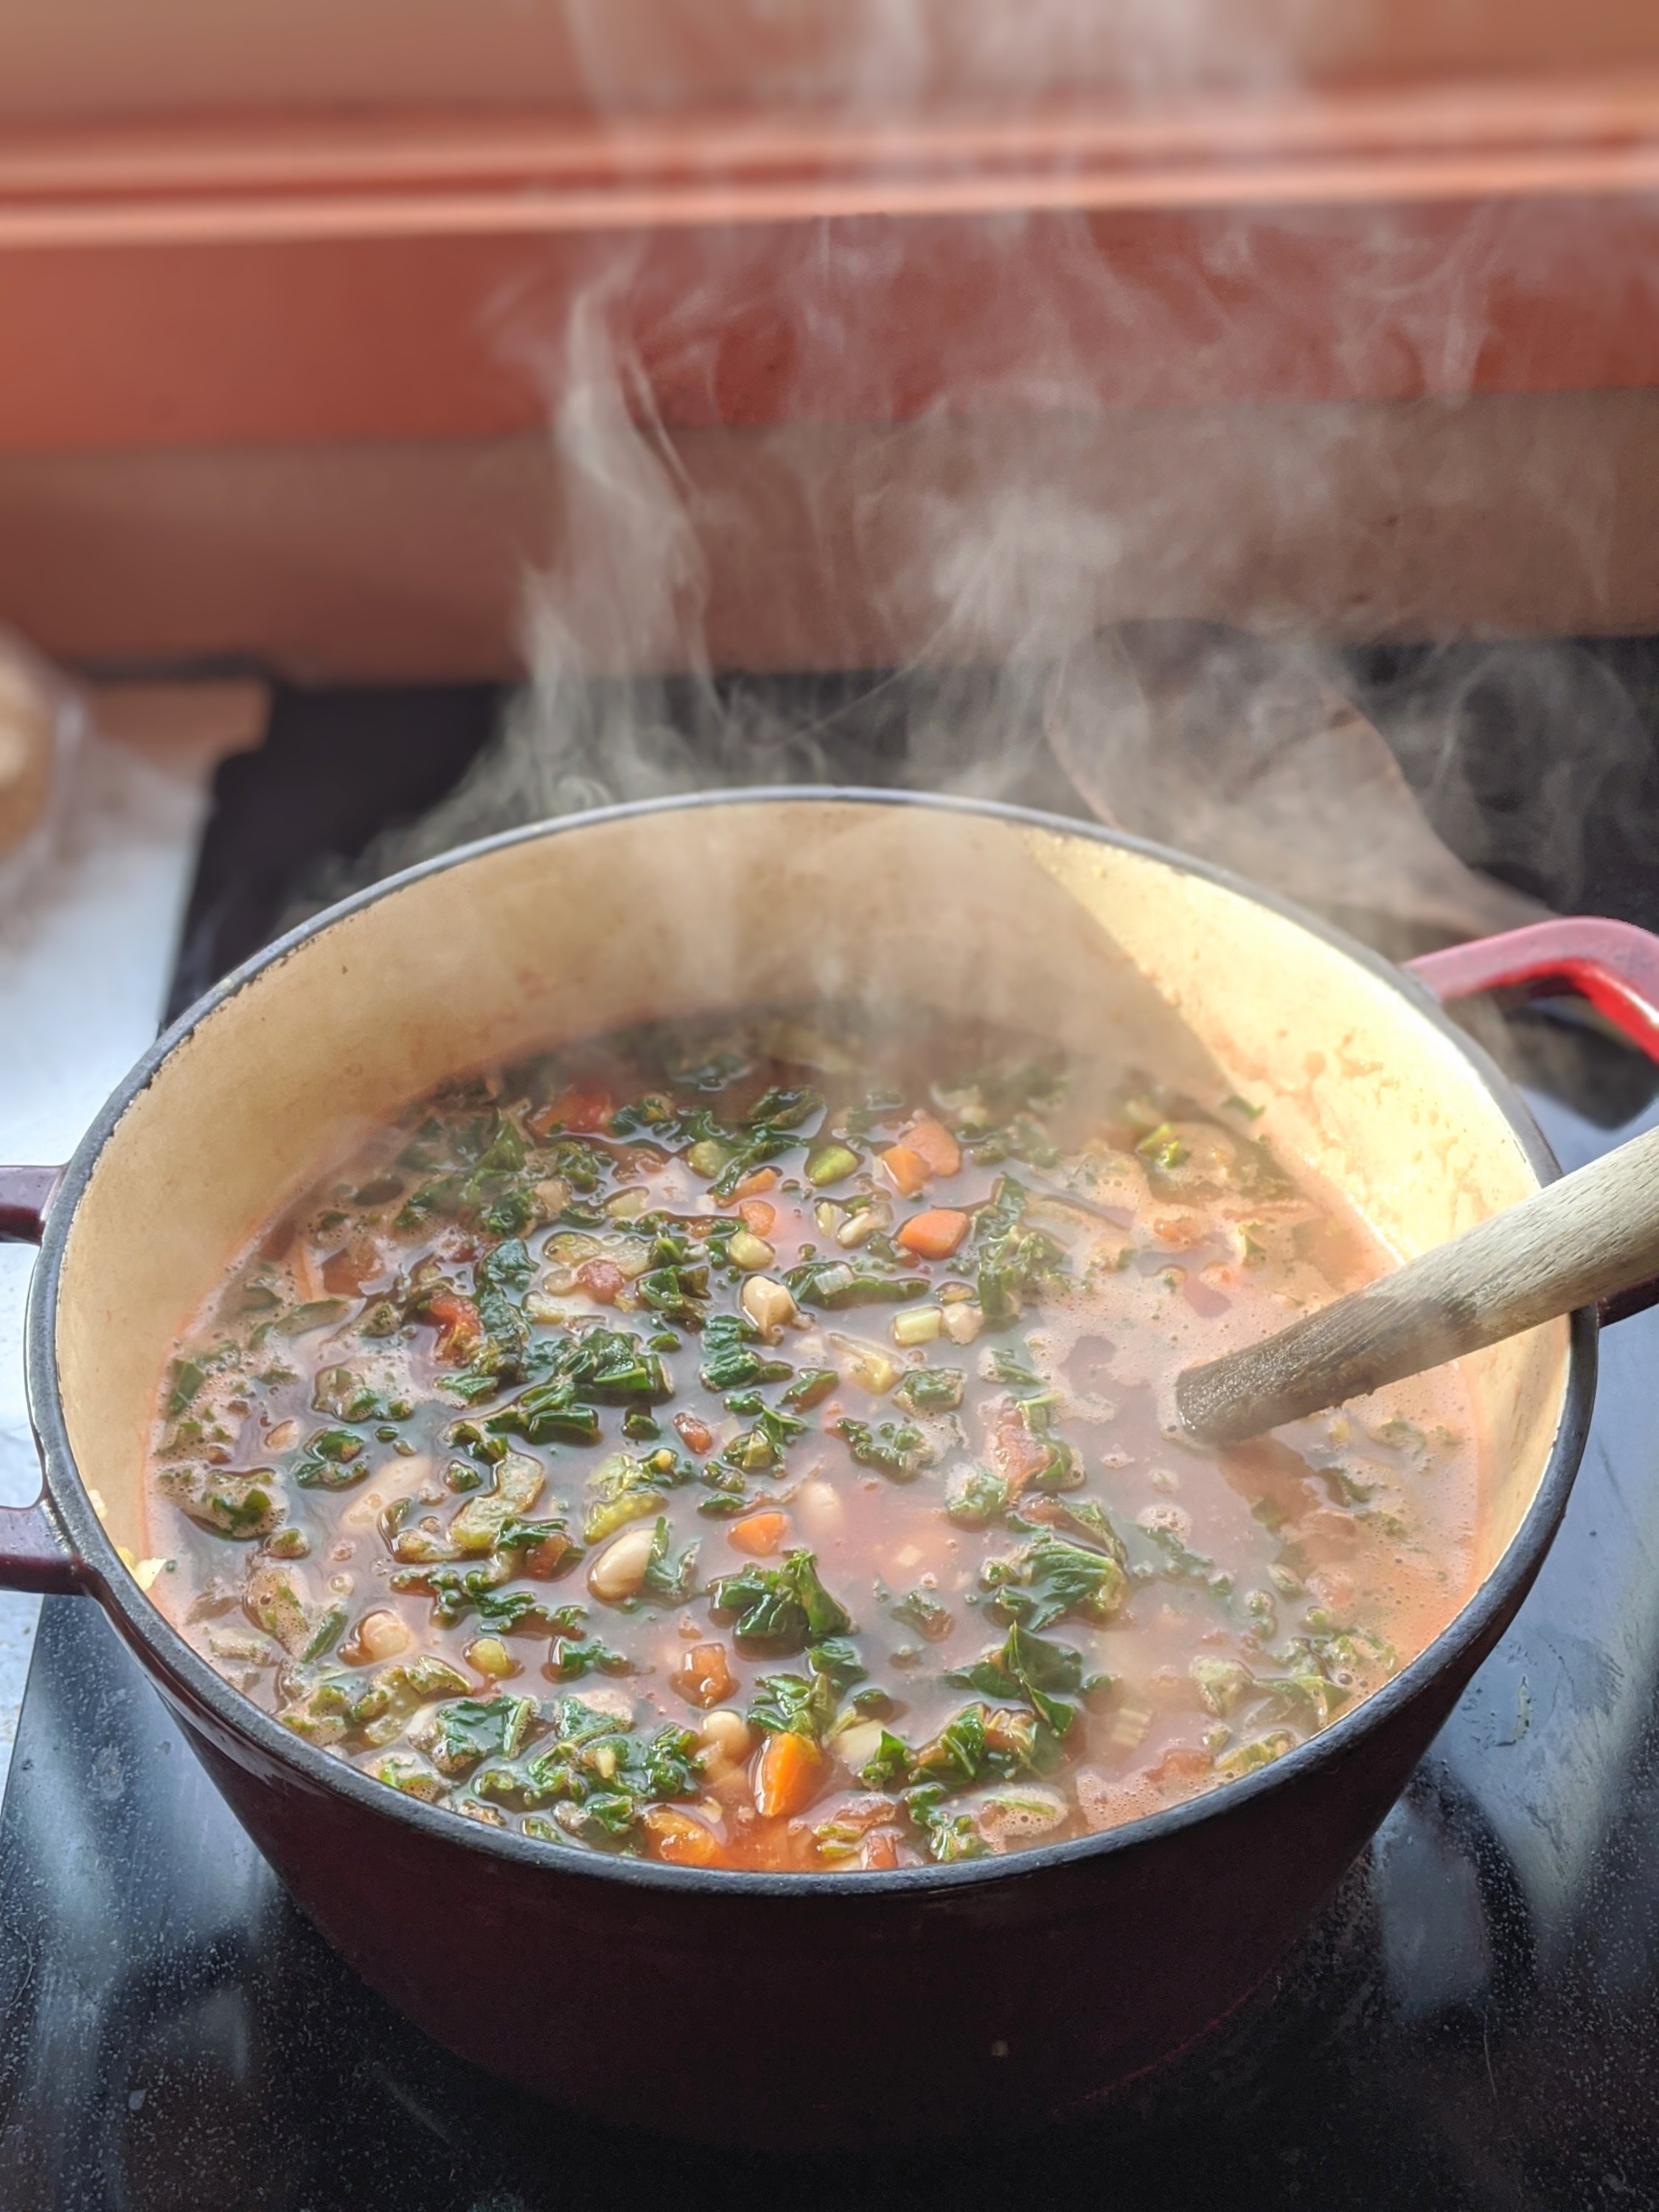 dutch oven italian soup recipe with white beans kale carrots olive oil and celery onions garlic spices vegan gluten free